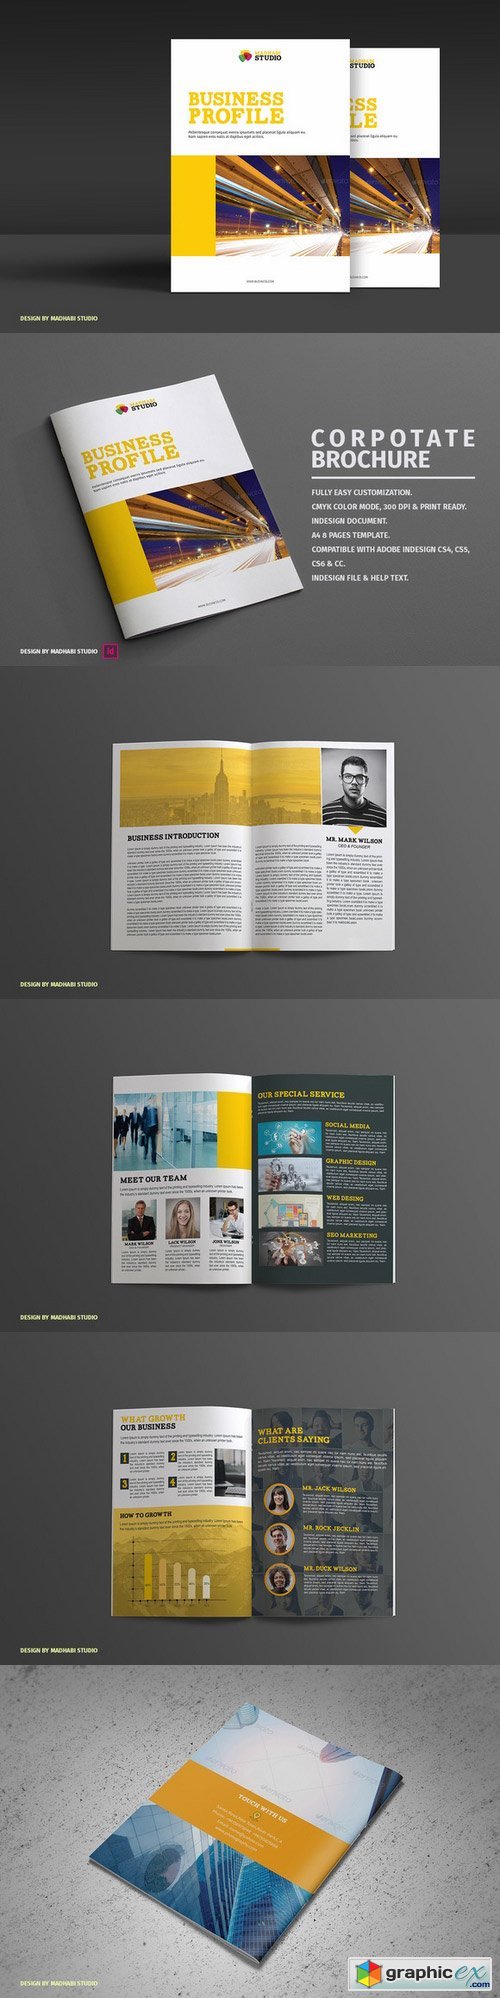 Corporate Brochure 8Pages